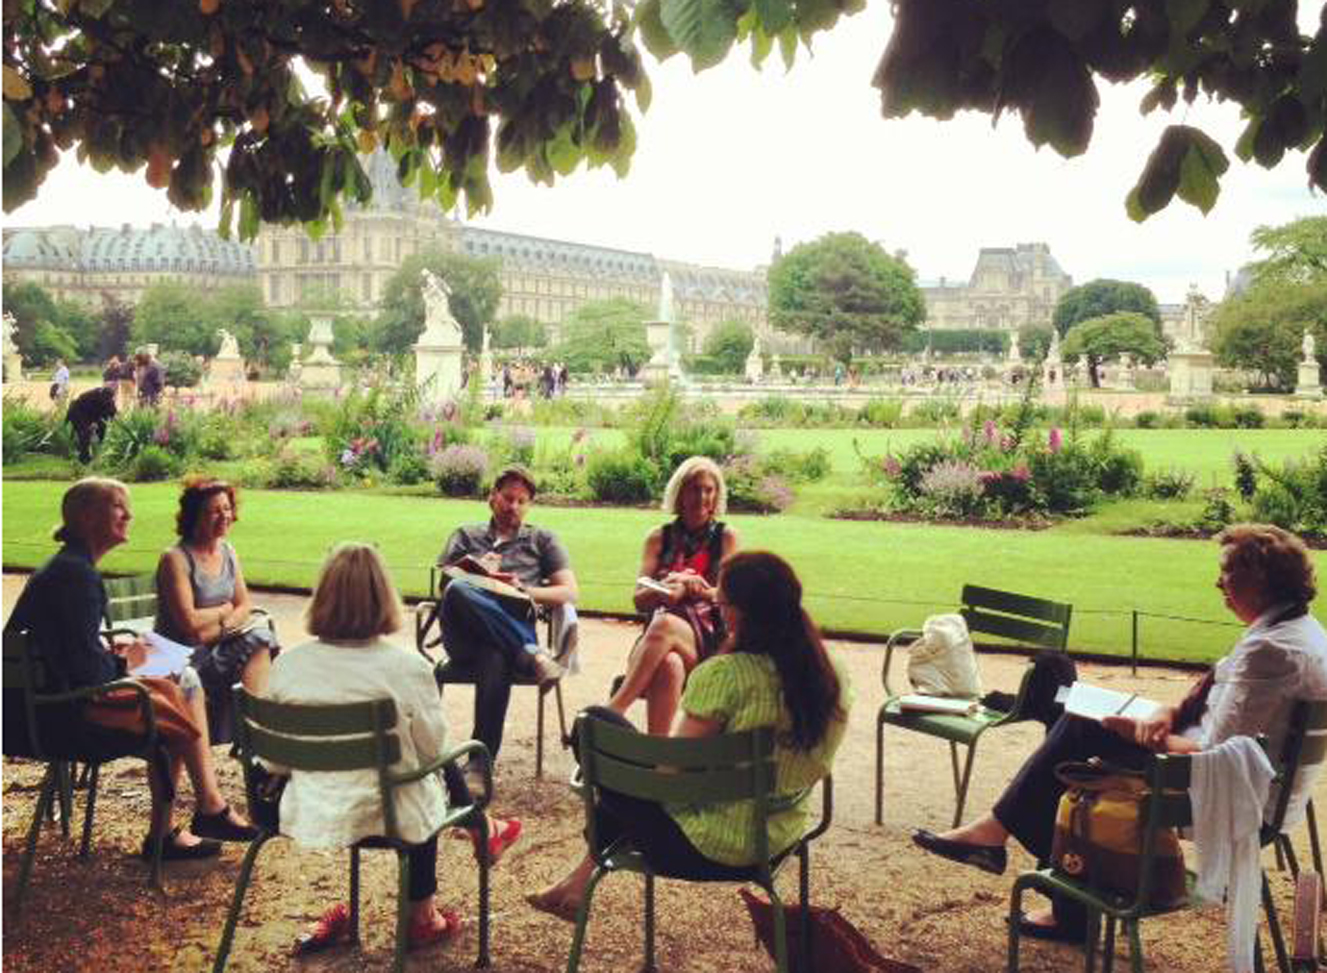 The Left Bank Writers Retreat in Paris each June leads writers to inspiring settings throughout the city for daily writing workshops.